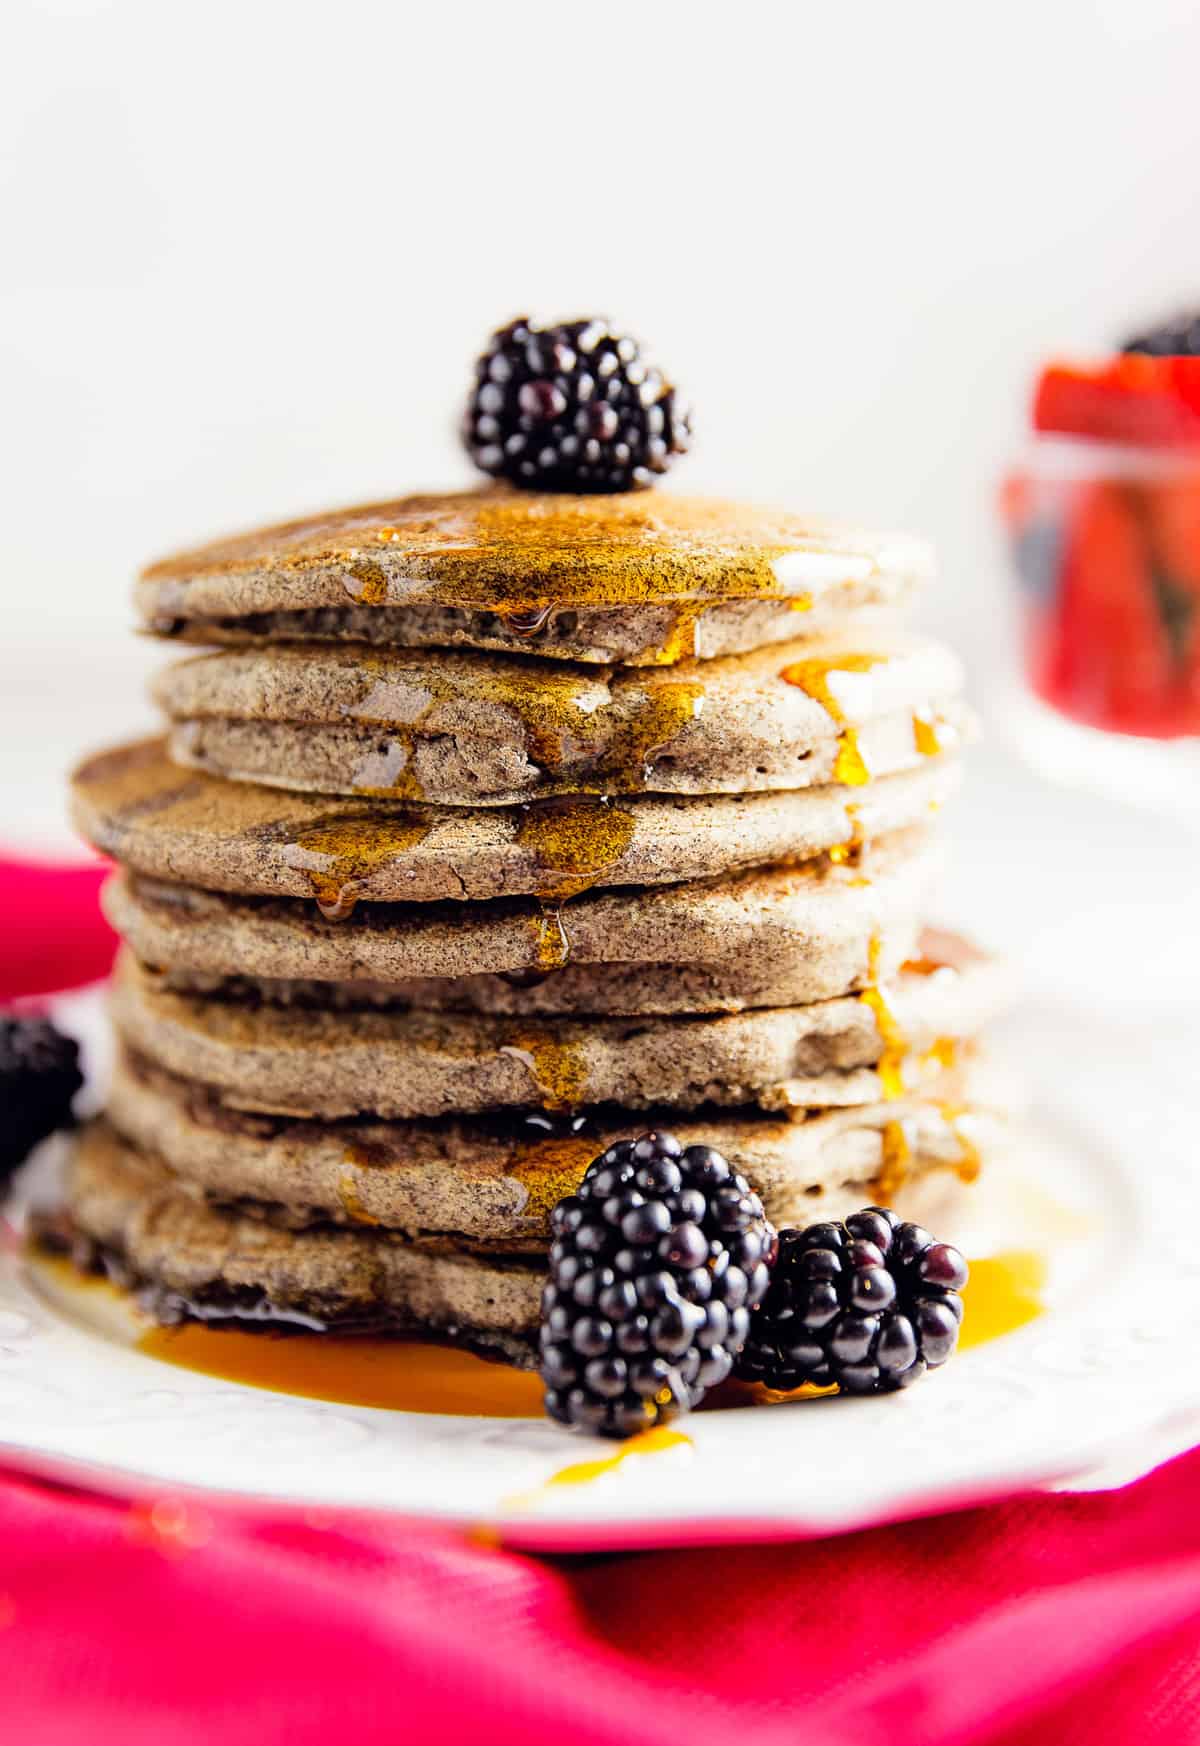 buckwheat pancakes, pancakes, maple syrup, refined sugar free, no refined sugar, breakfast, vegan, vegan recipe, whole food plant based recipe, whole food plant based, vegetarian, vegetarian recipe, gluten free, gluten free recipe, vegan breakfast, vegan meals, vegetarian breakfast, vegetarian meal, whole food plant based breakfast, whole food plant based meal, gluten free breakfast, gluten free meal, healthy, oil free, no oil, healthy breakfast, healthy pancakes, fast, simple, quick, easy, 30 minutes or less, summer, fall, winter, spring, entertaining, holiday